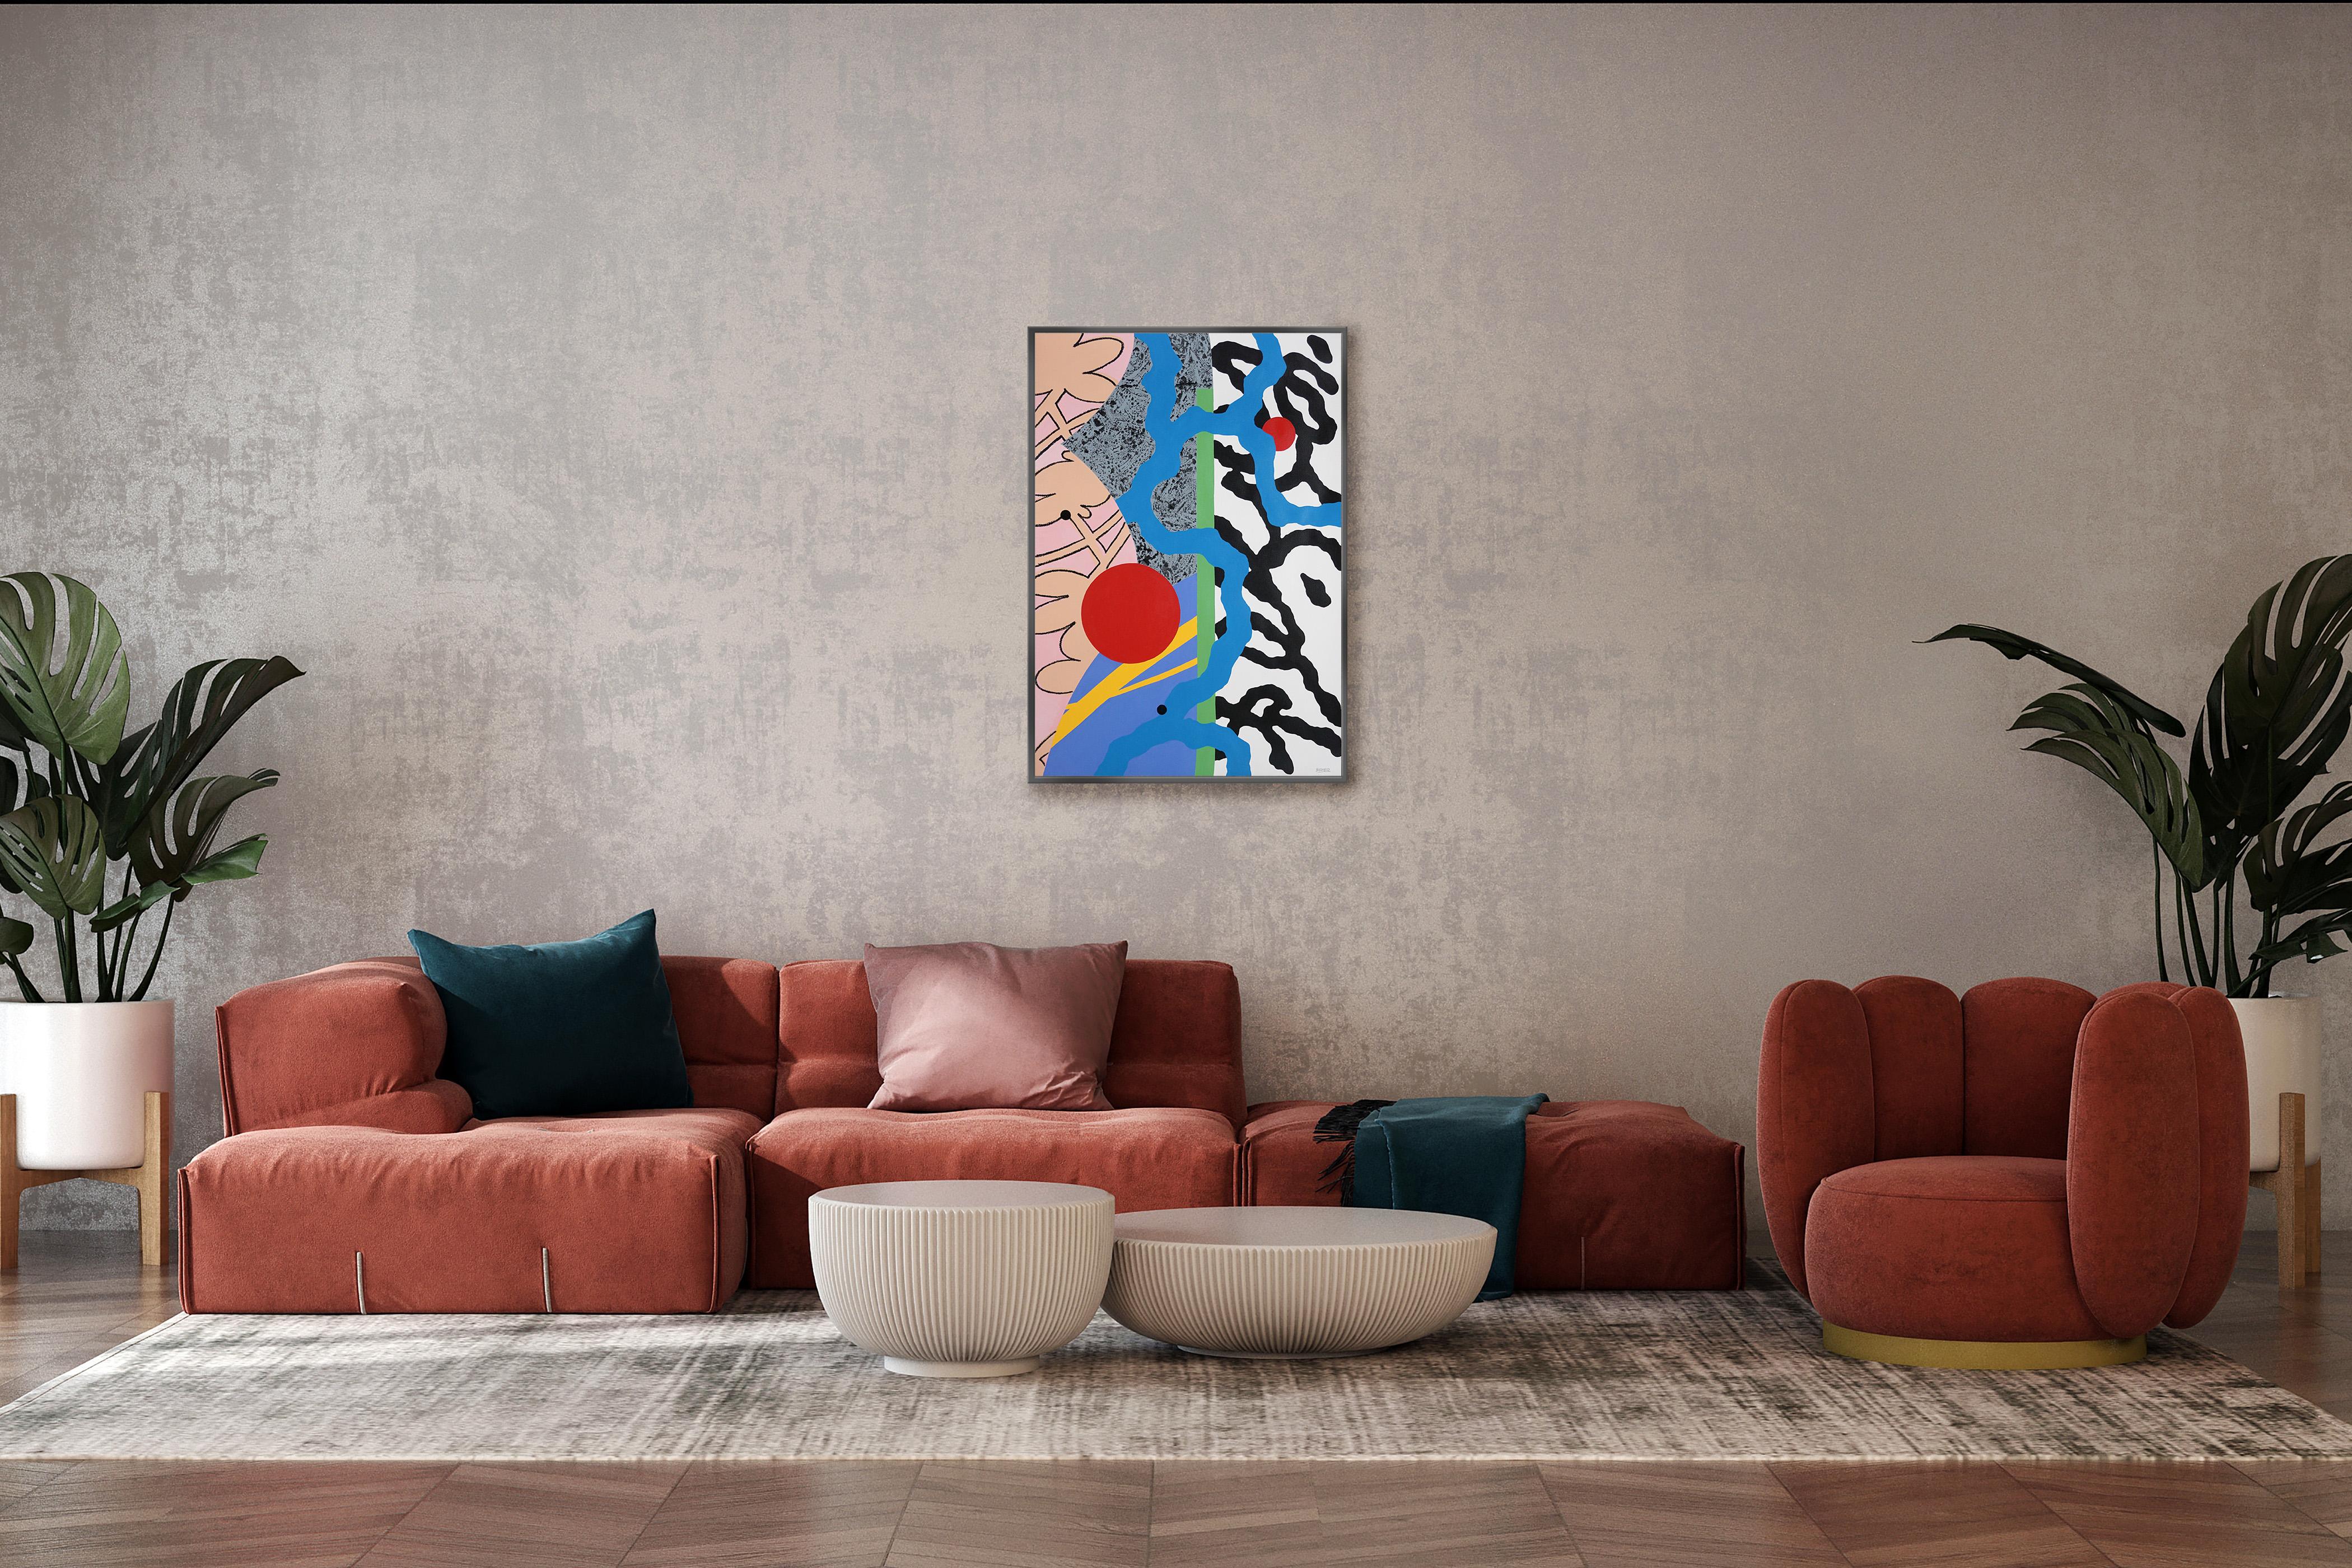 Urban Flowers Painting, Graffiti Style, Abstract Shapes, Red, Blue, White, Black 1